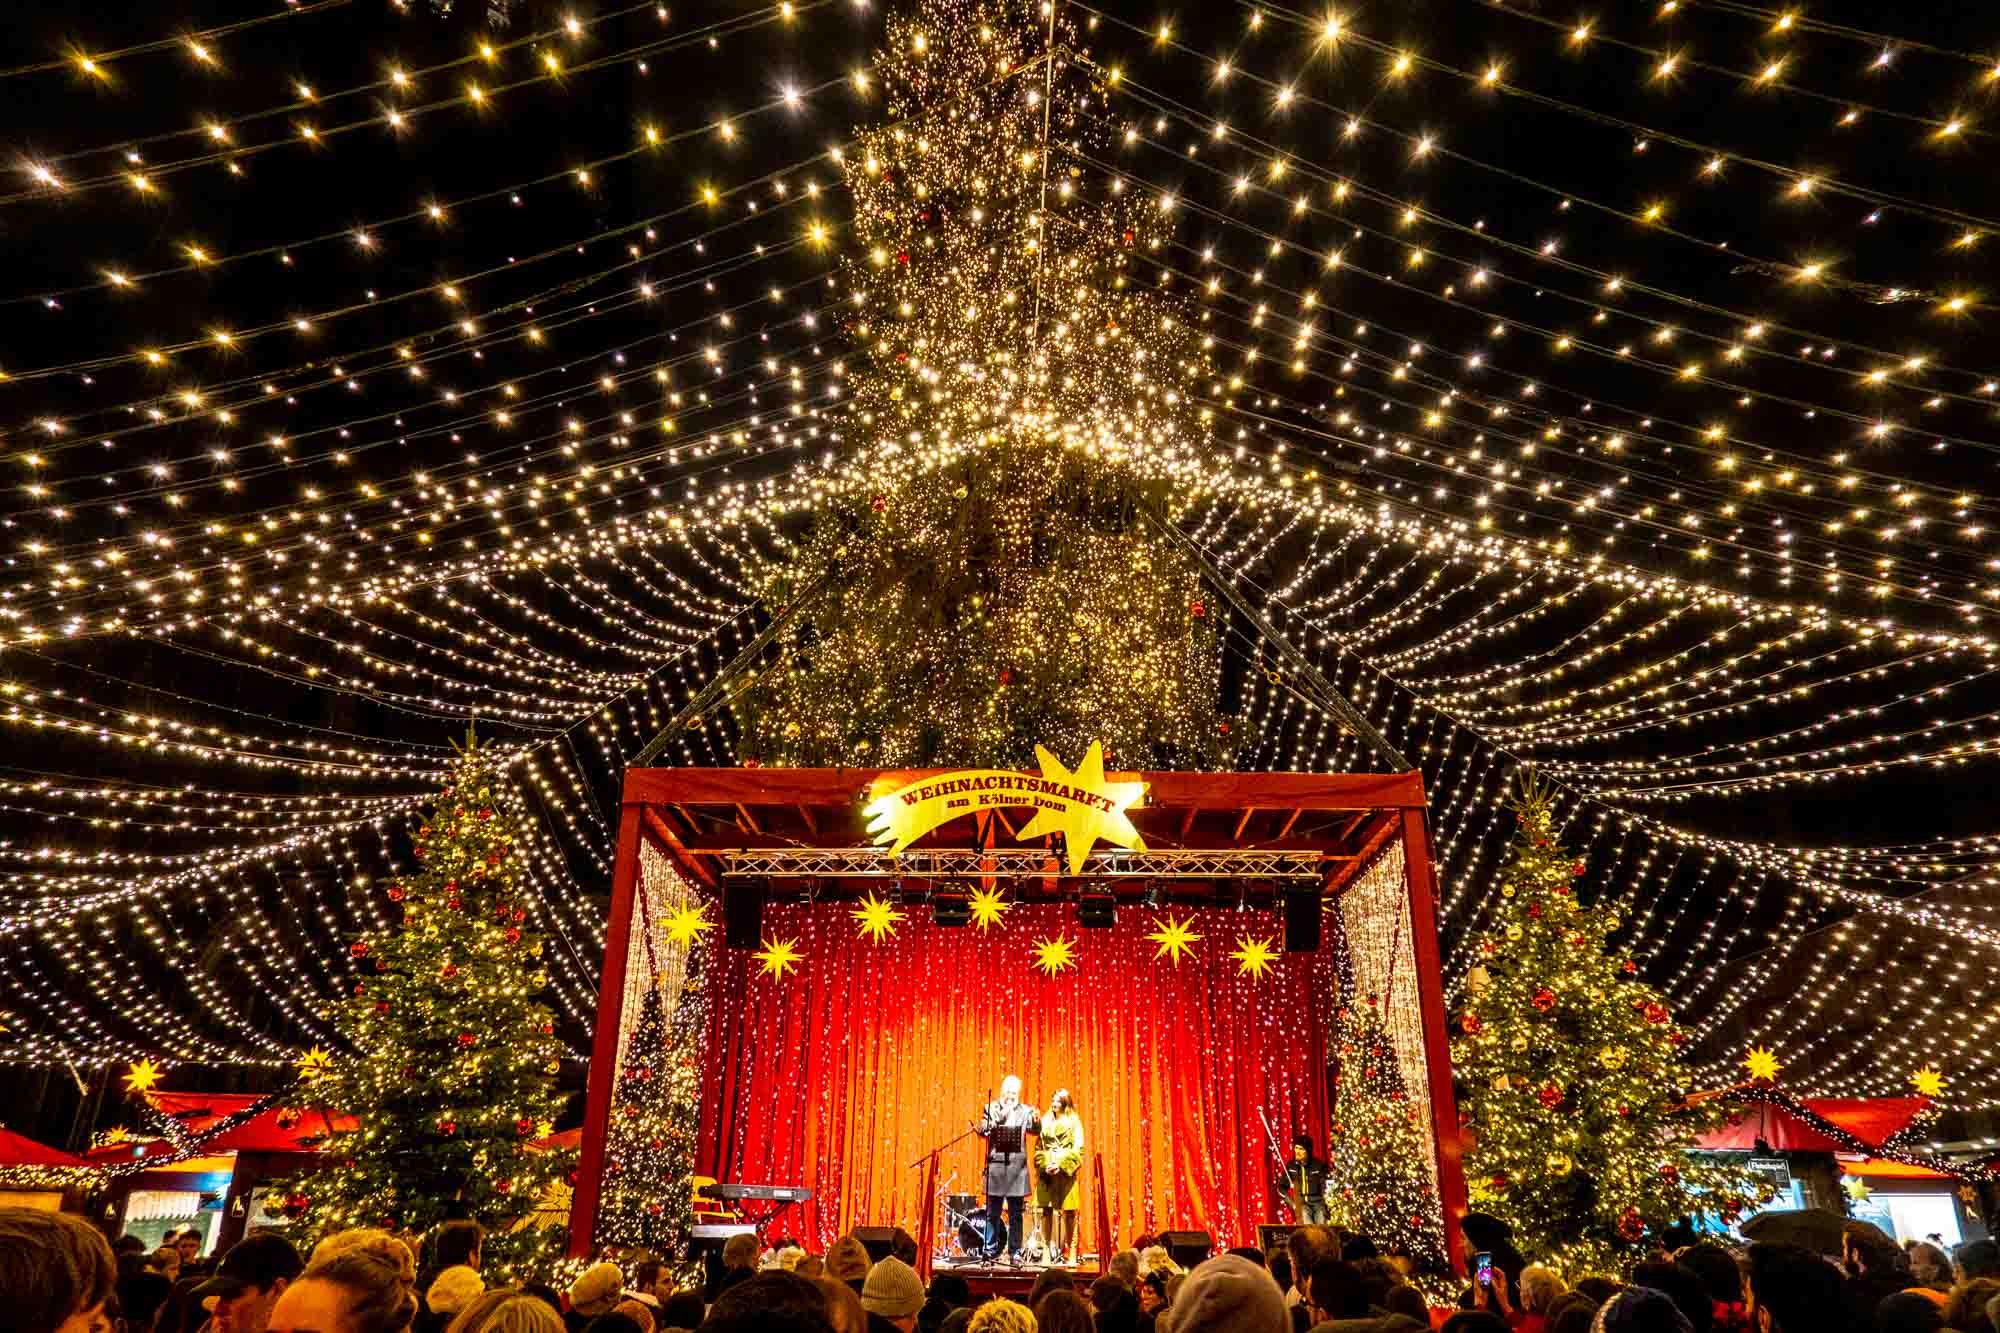 Singers on a stage under a canopy of Christmas lights